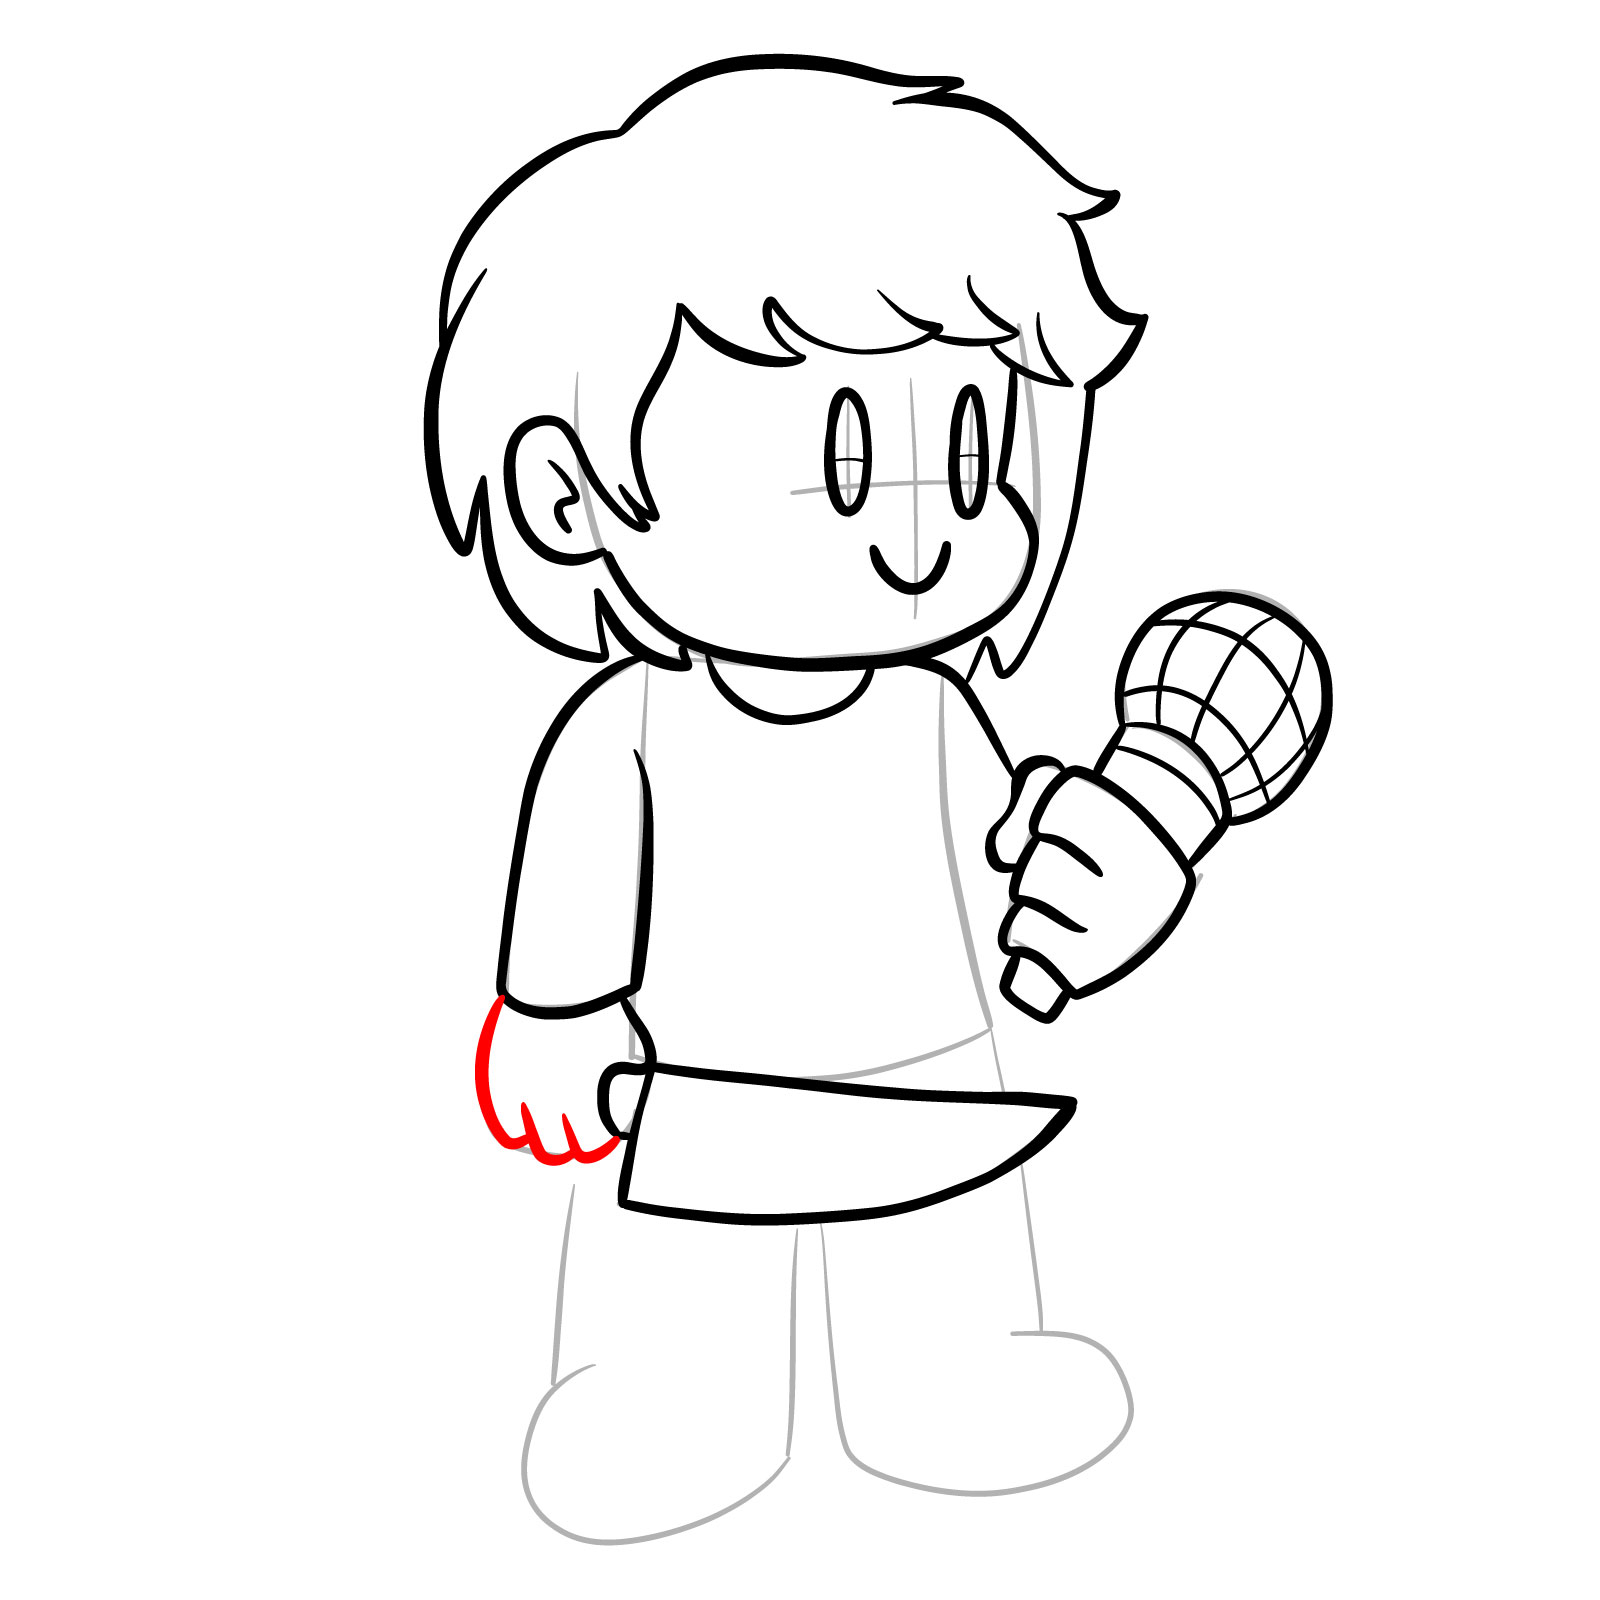 How to draw Chara from FNF - step 22